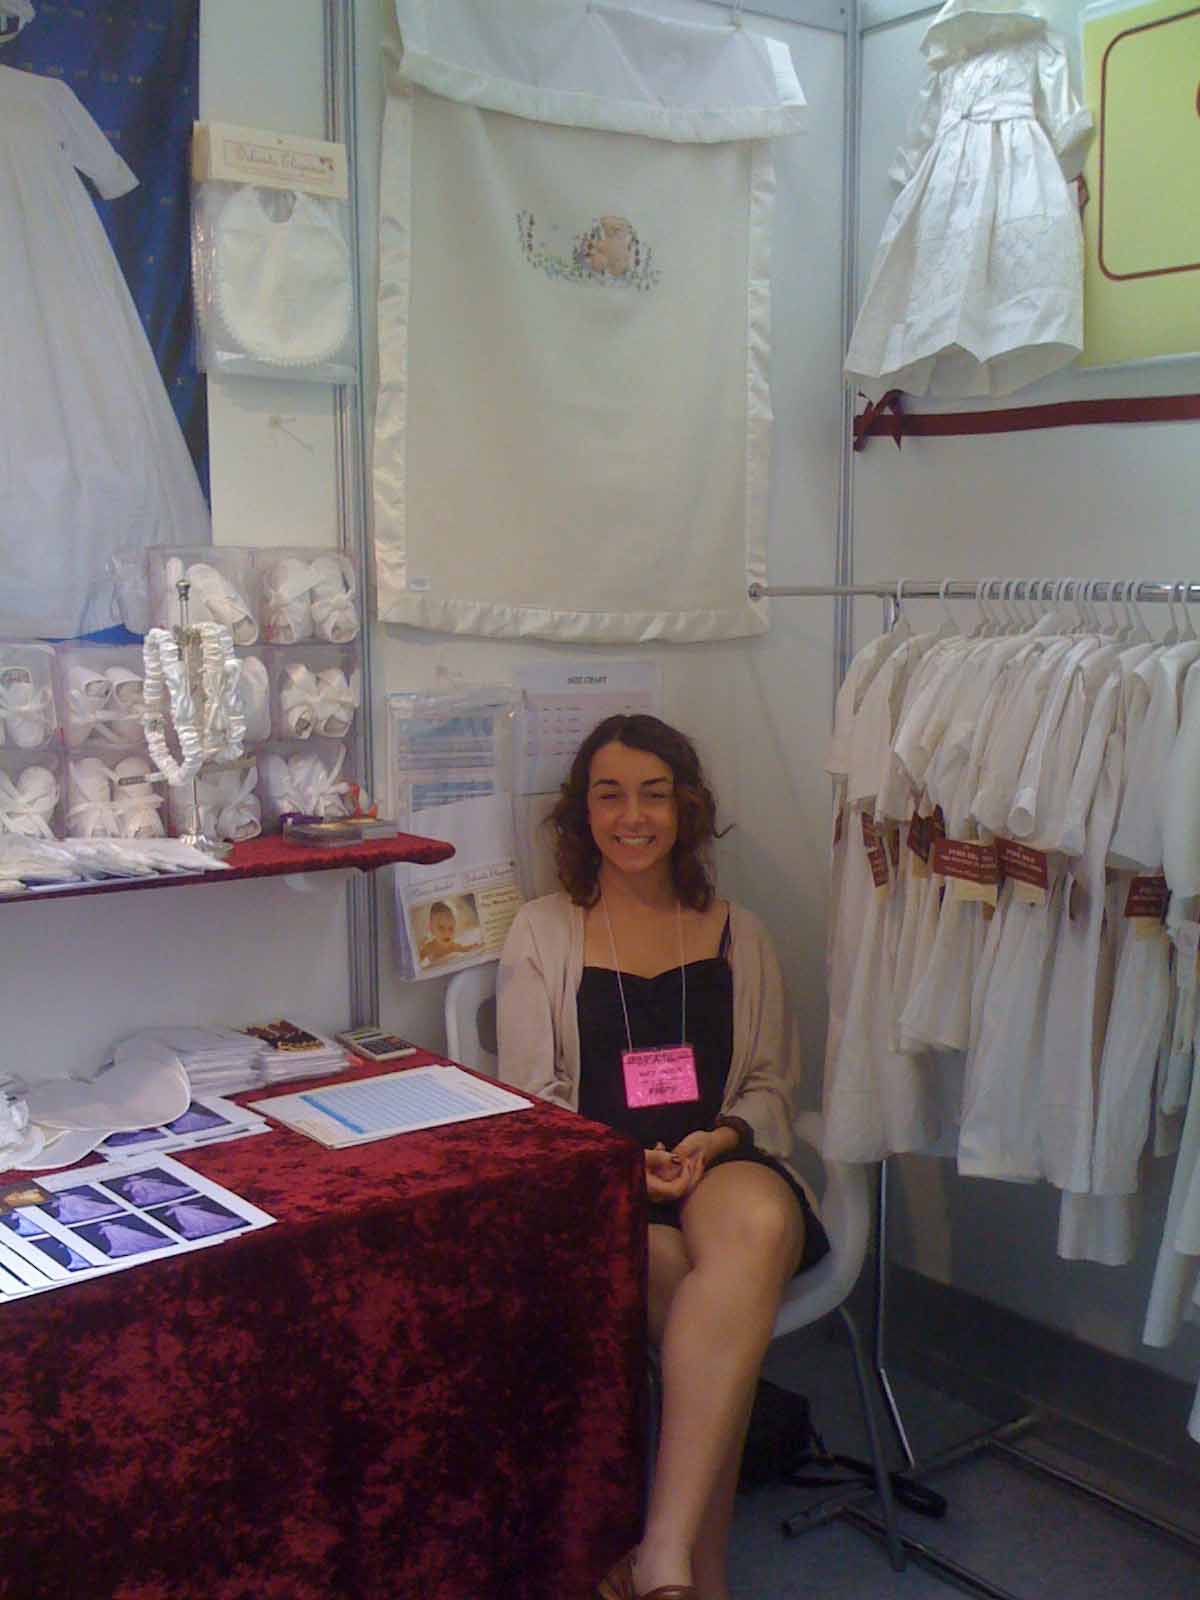 Delicate Elegance exhibiting at ENK Children's Club trade show in New York, USA in August 2010